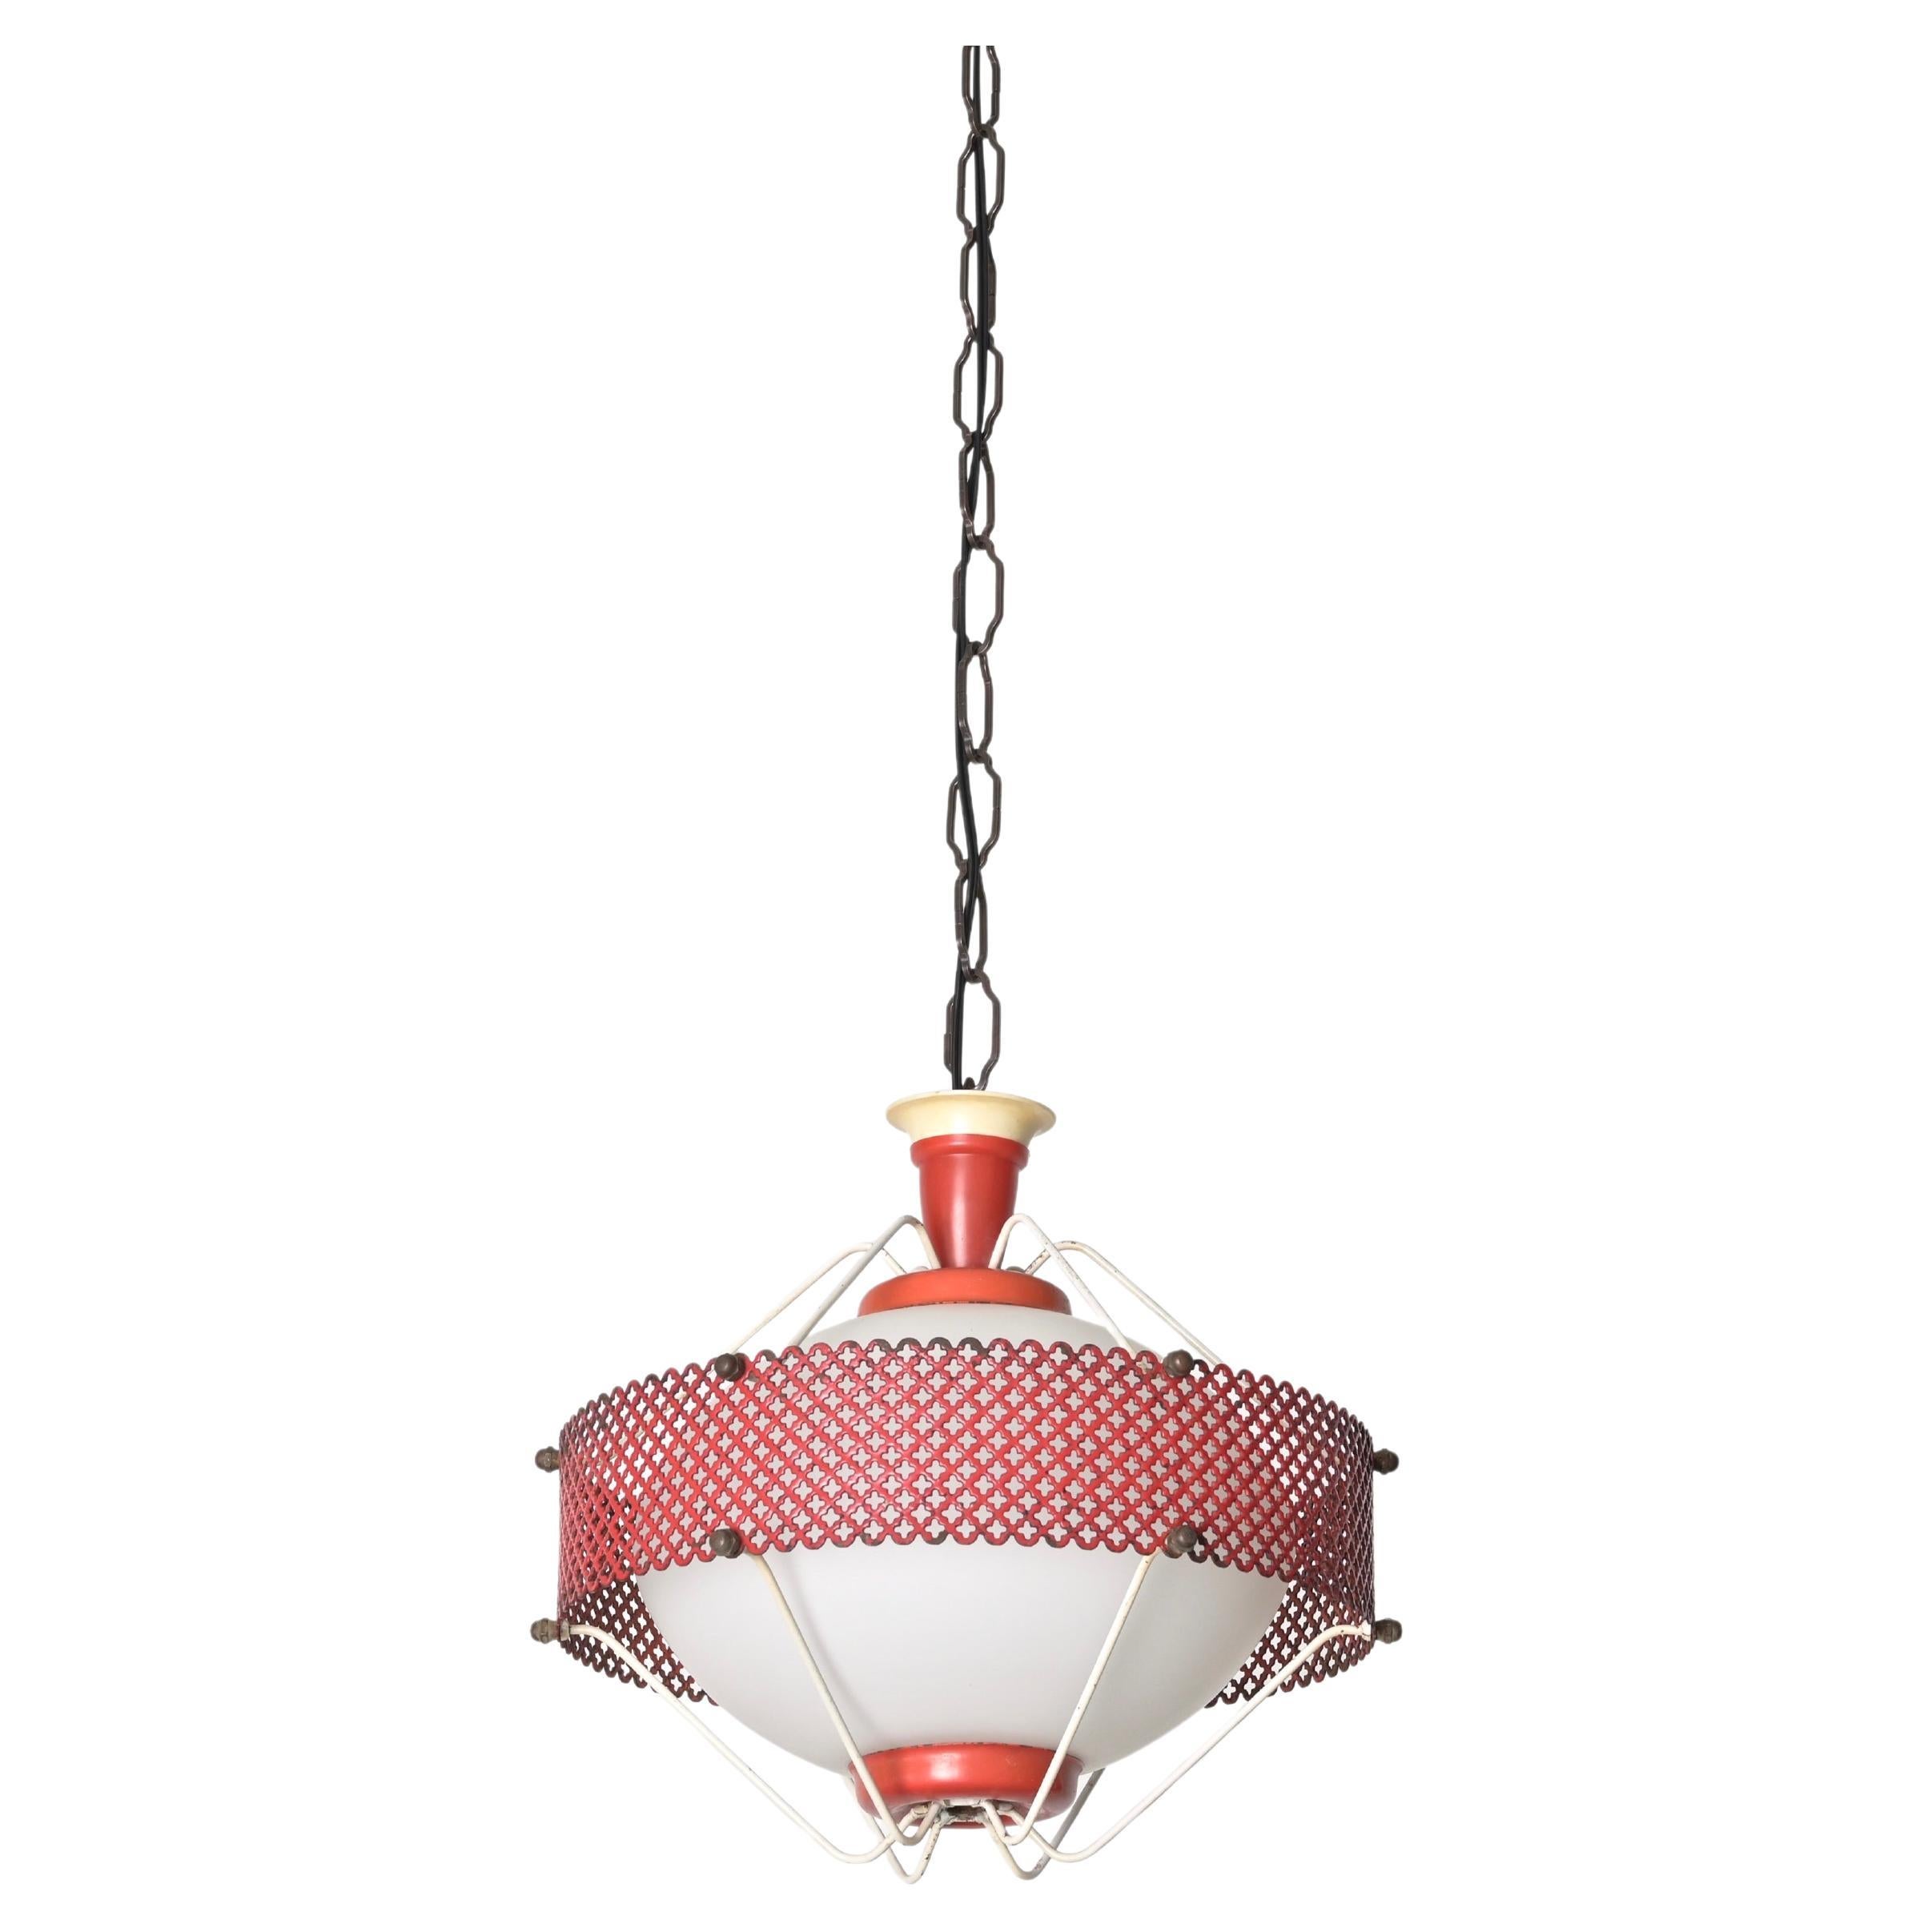 Italian Mathieu Matégot Pendant Lamps in Opal Glass, Red Metal, 1950s French Lighting For Sale